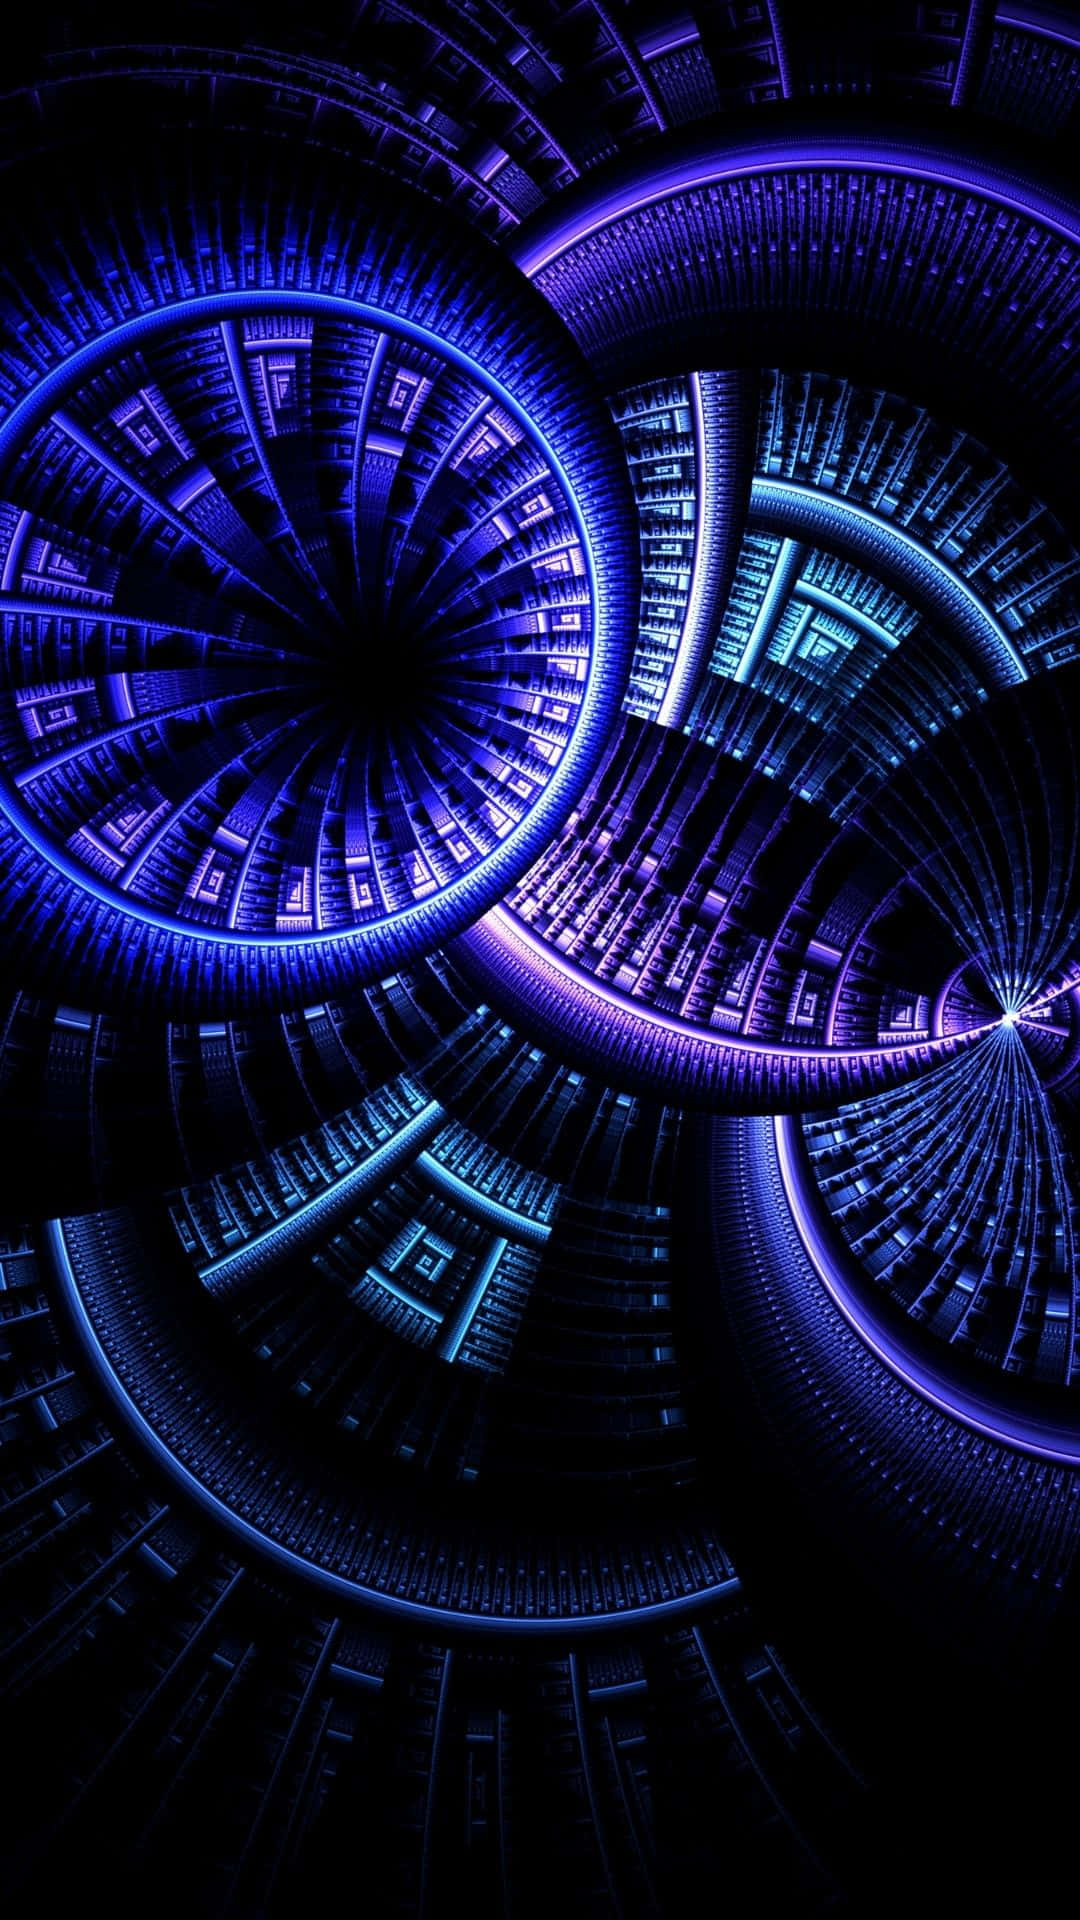 A Blue And Purple Abstract Background With A Spiral Design